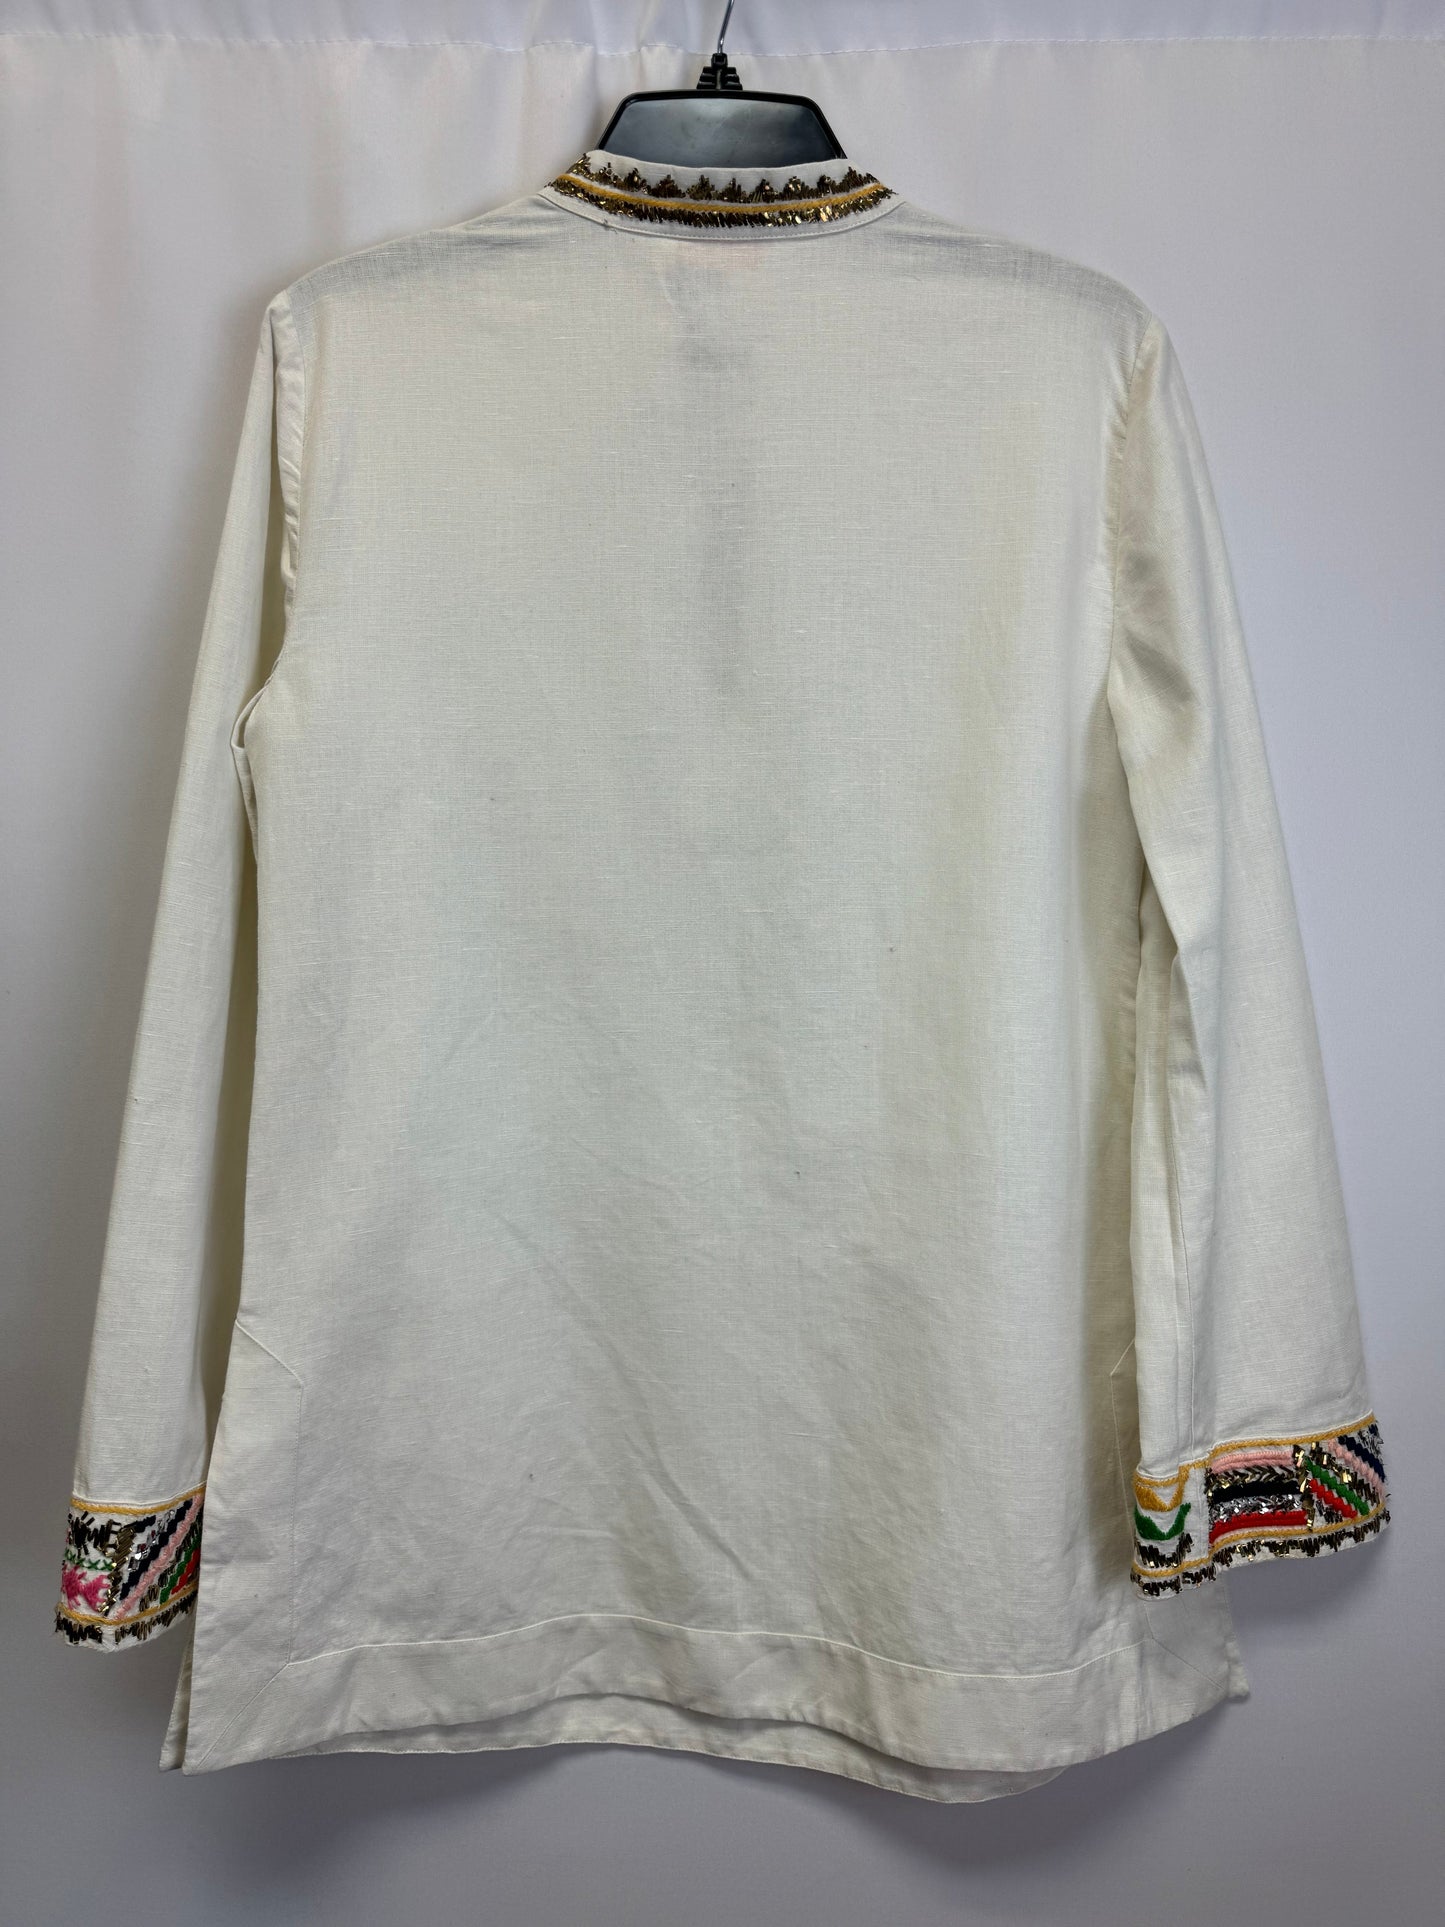 Tunic 3/4 Sleeve By Tory Burch  Size: M (10)